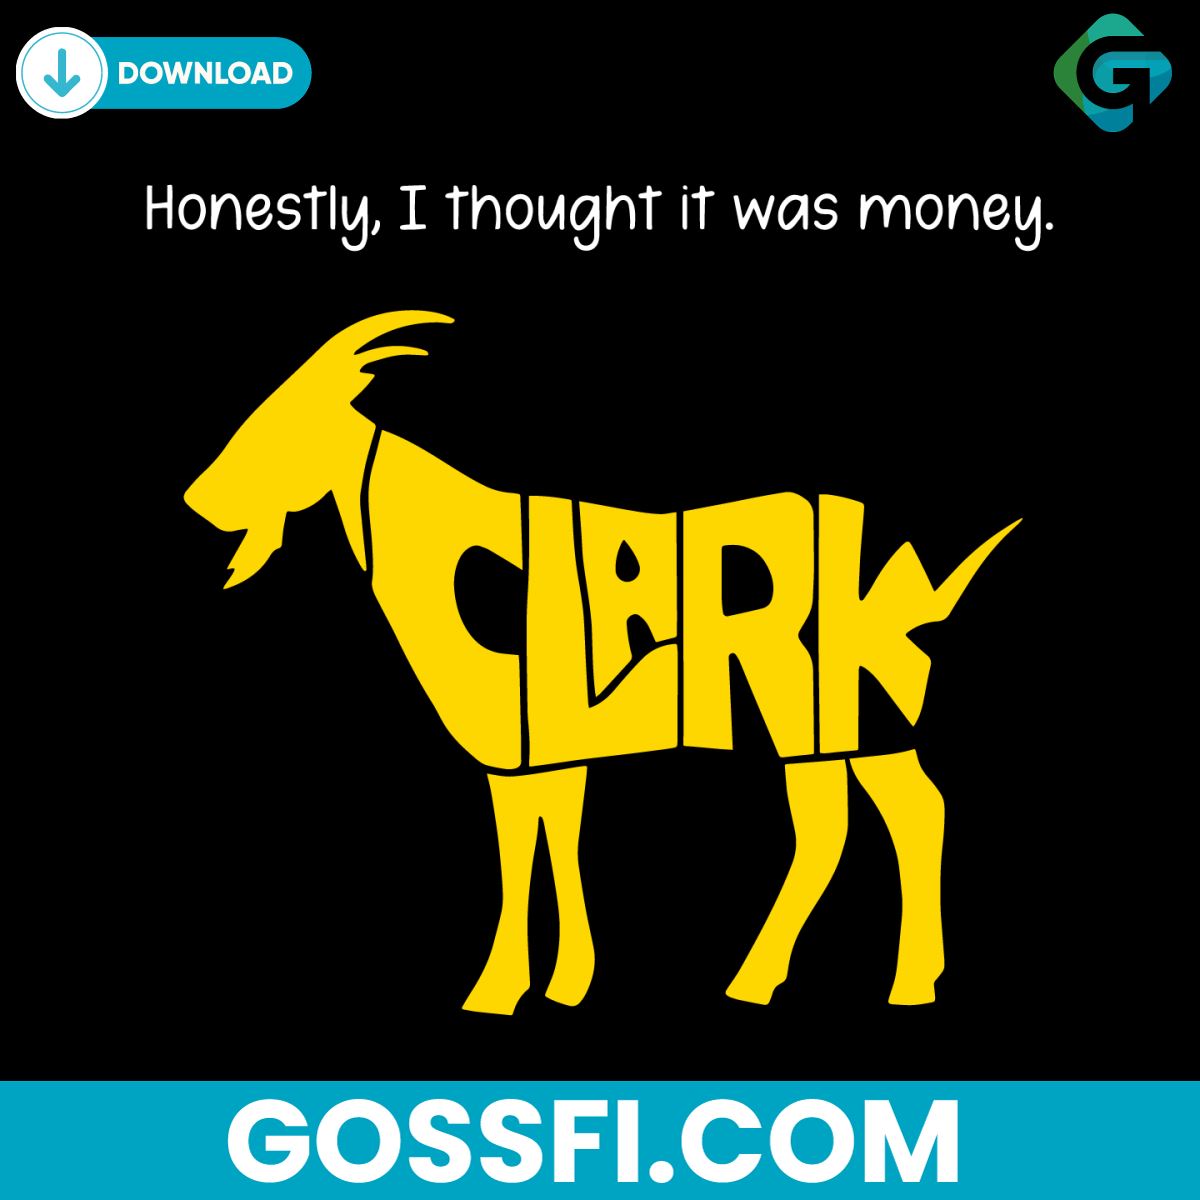 goat-clark-honestly-i-thought-it-was-money-svg